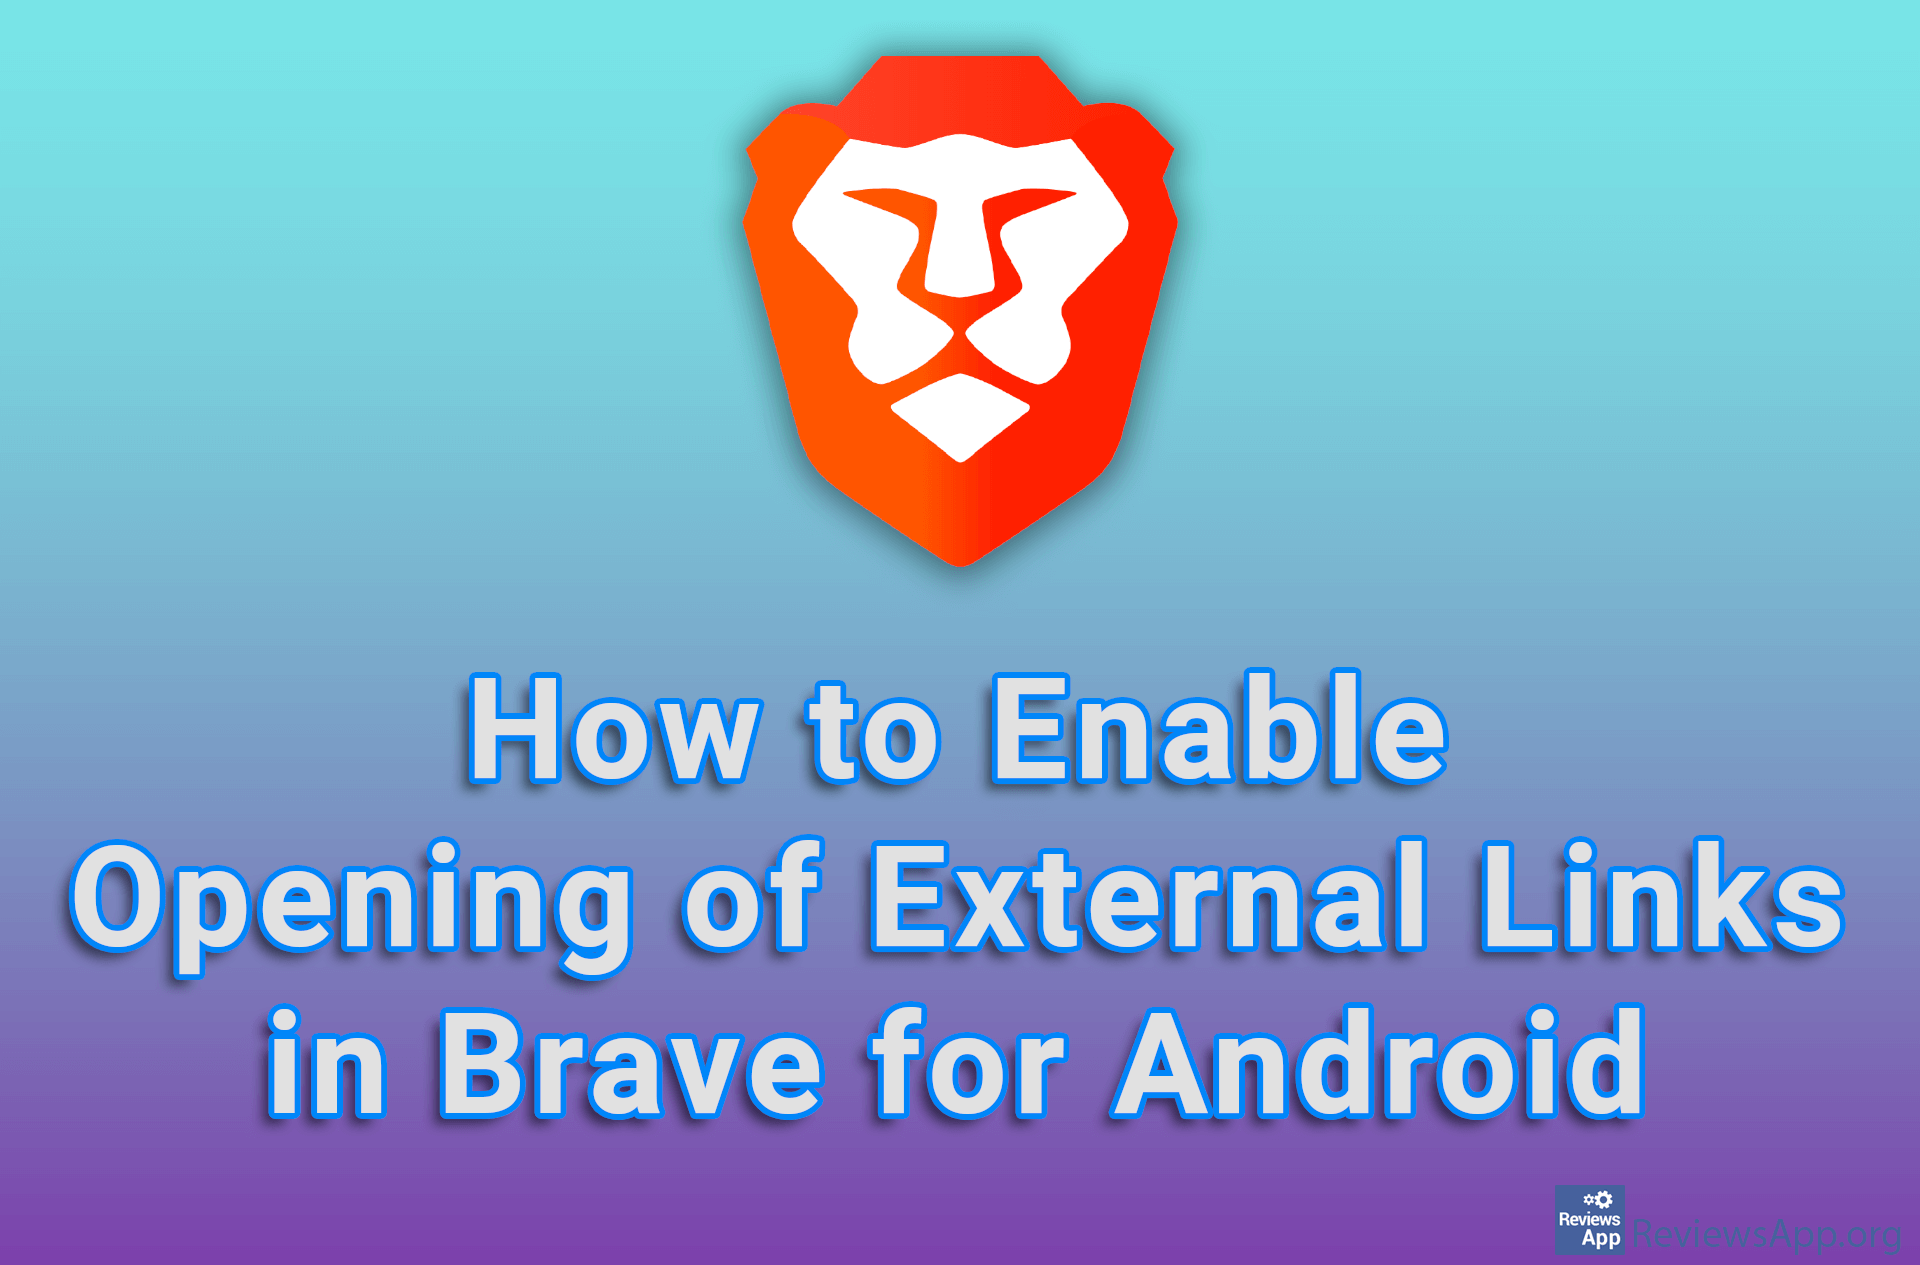 How to Enable Opening of External Links in Brave for Android